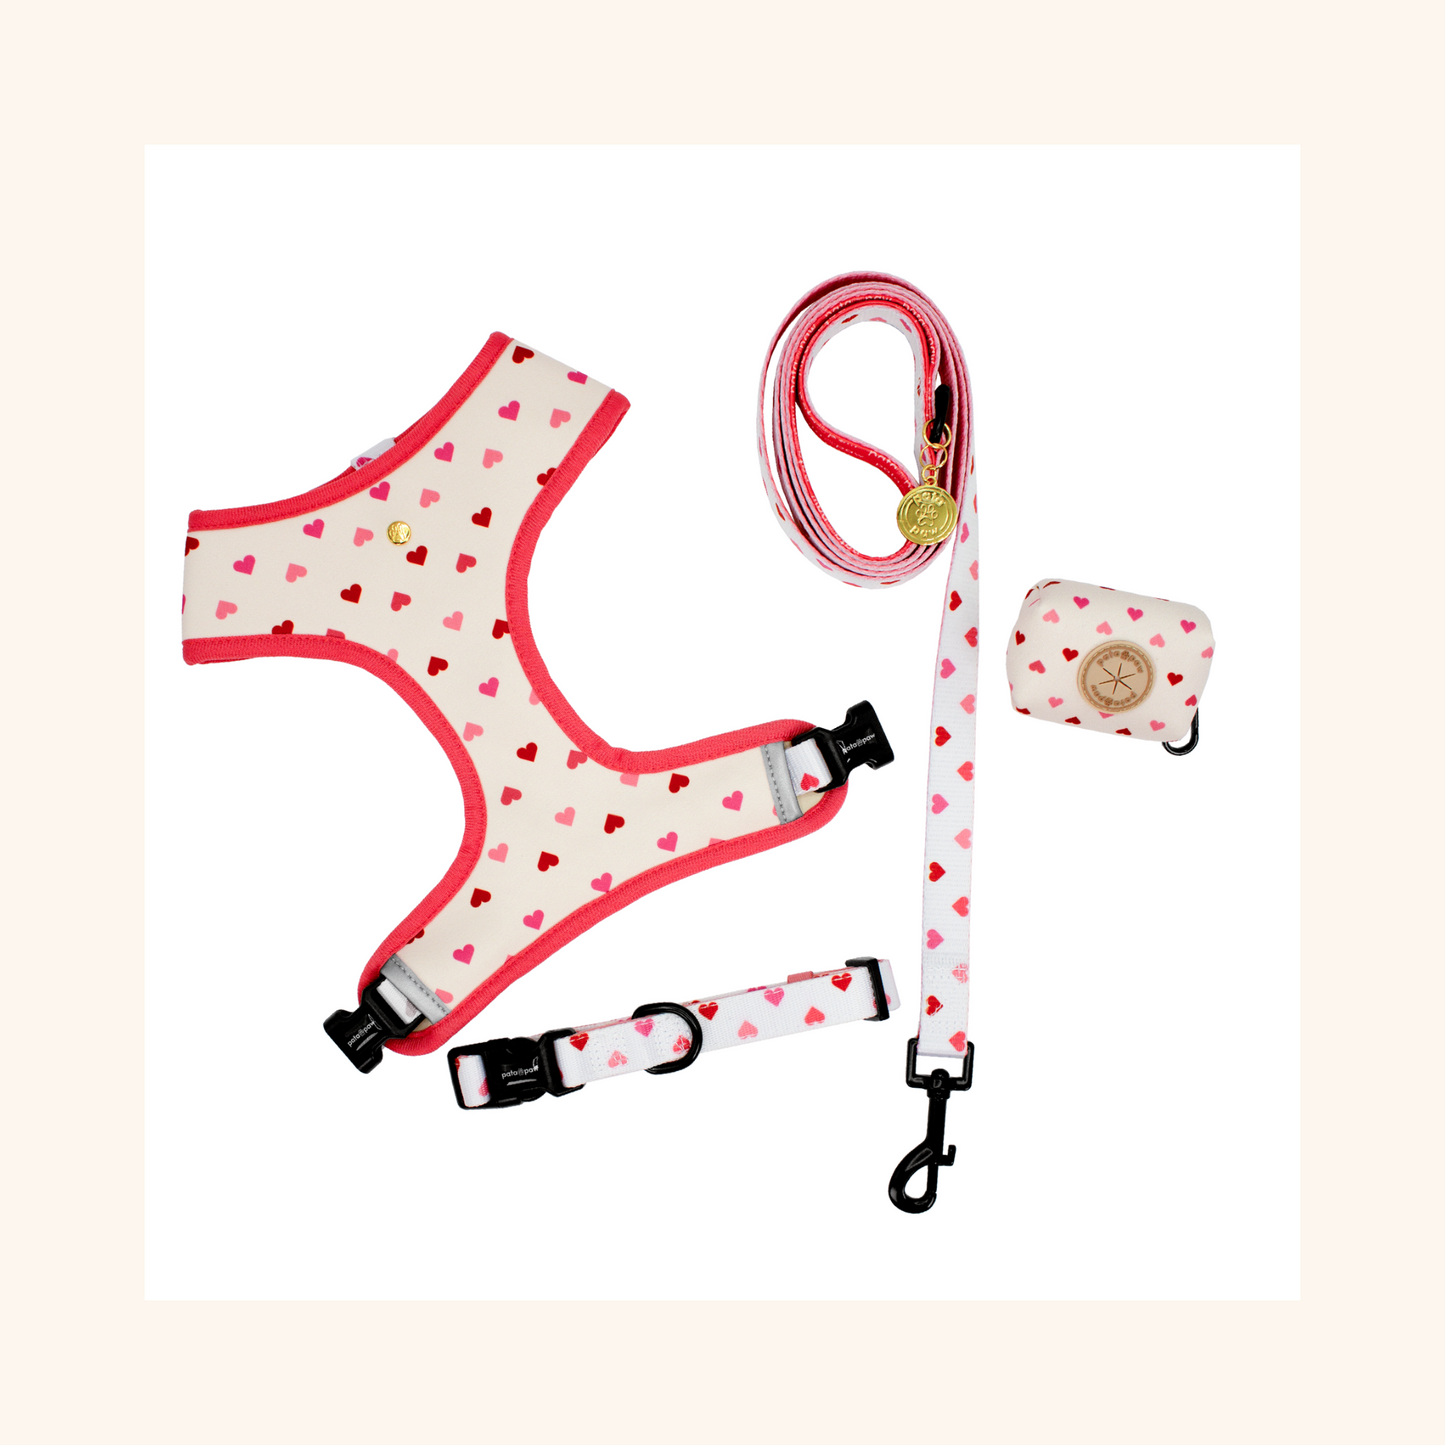 pata paw blush hearts set: reversible harness, leash, collar, and poop bag holder